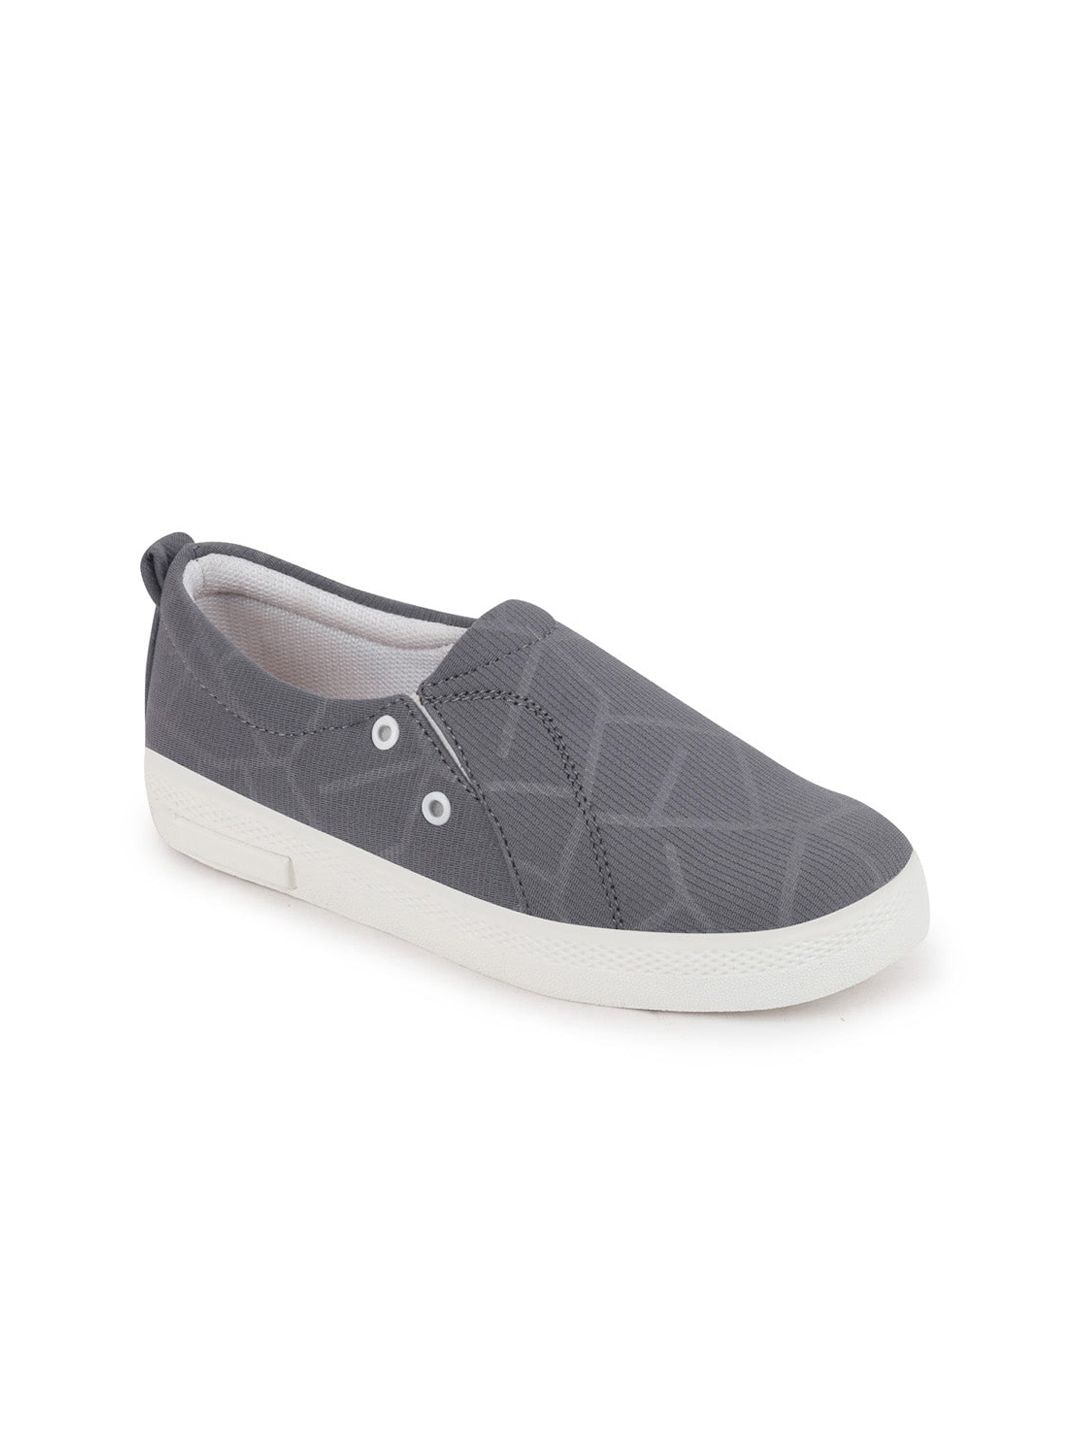 FAUSTO Women Grey Woven Design Loafers Price in India